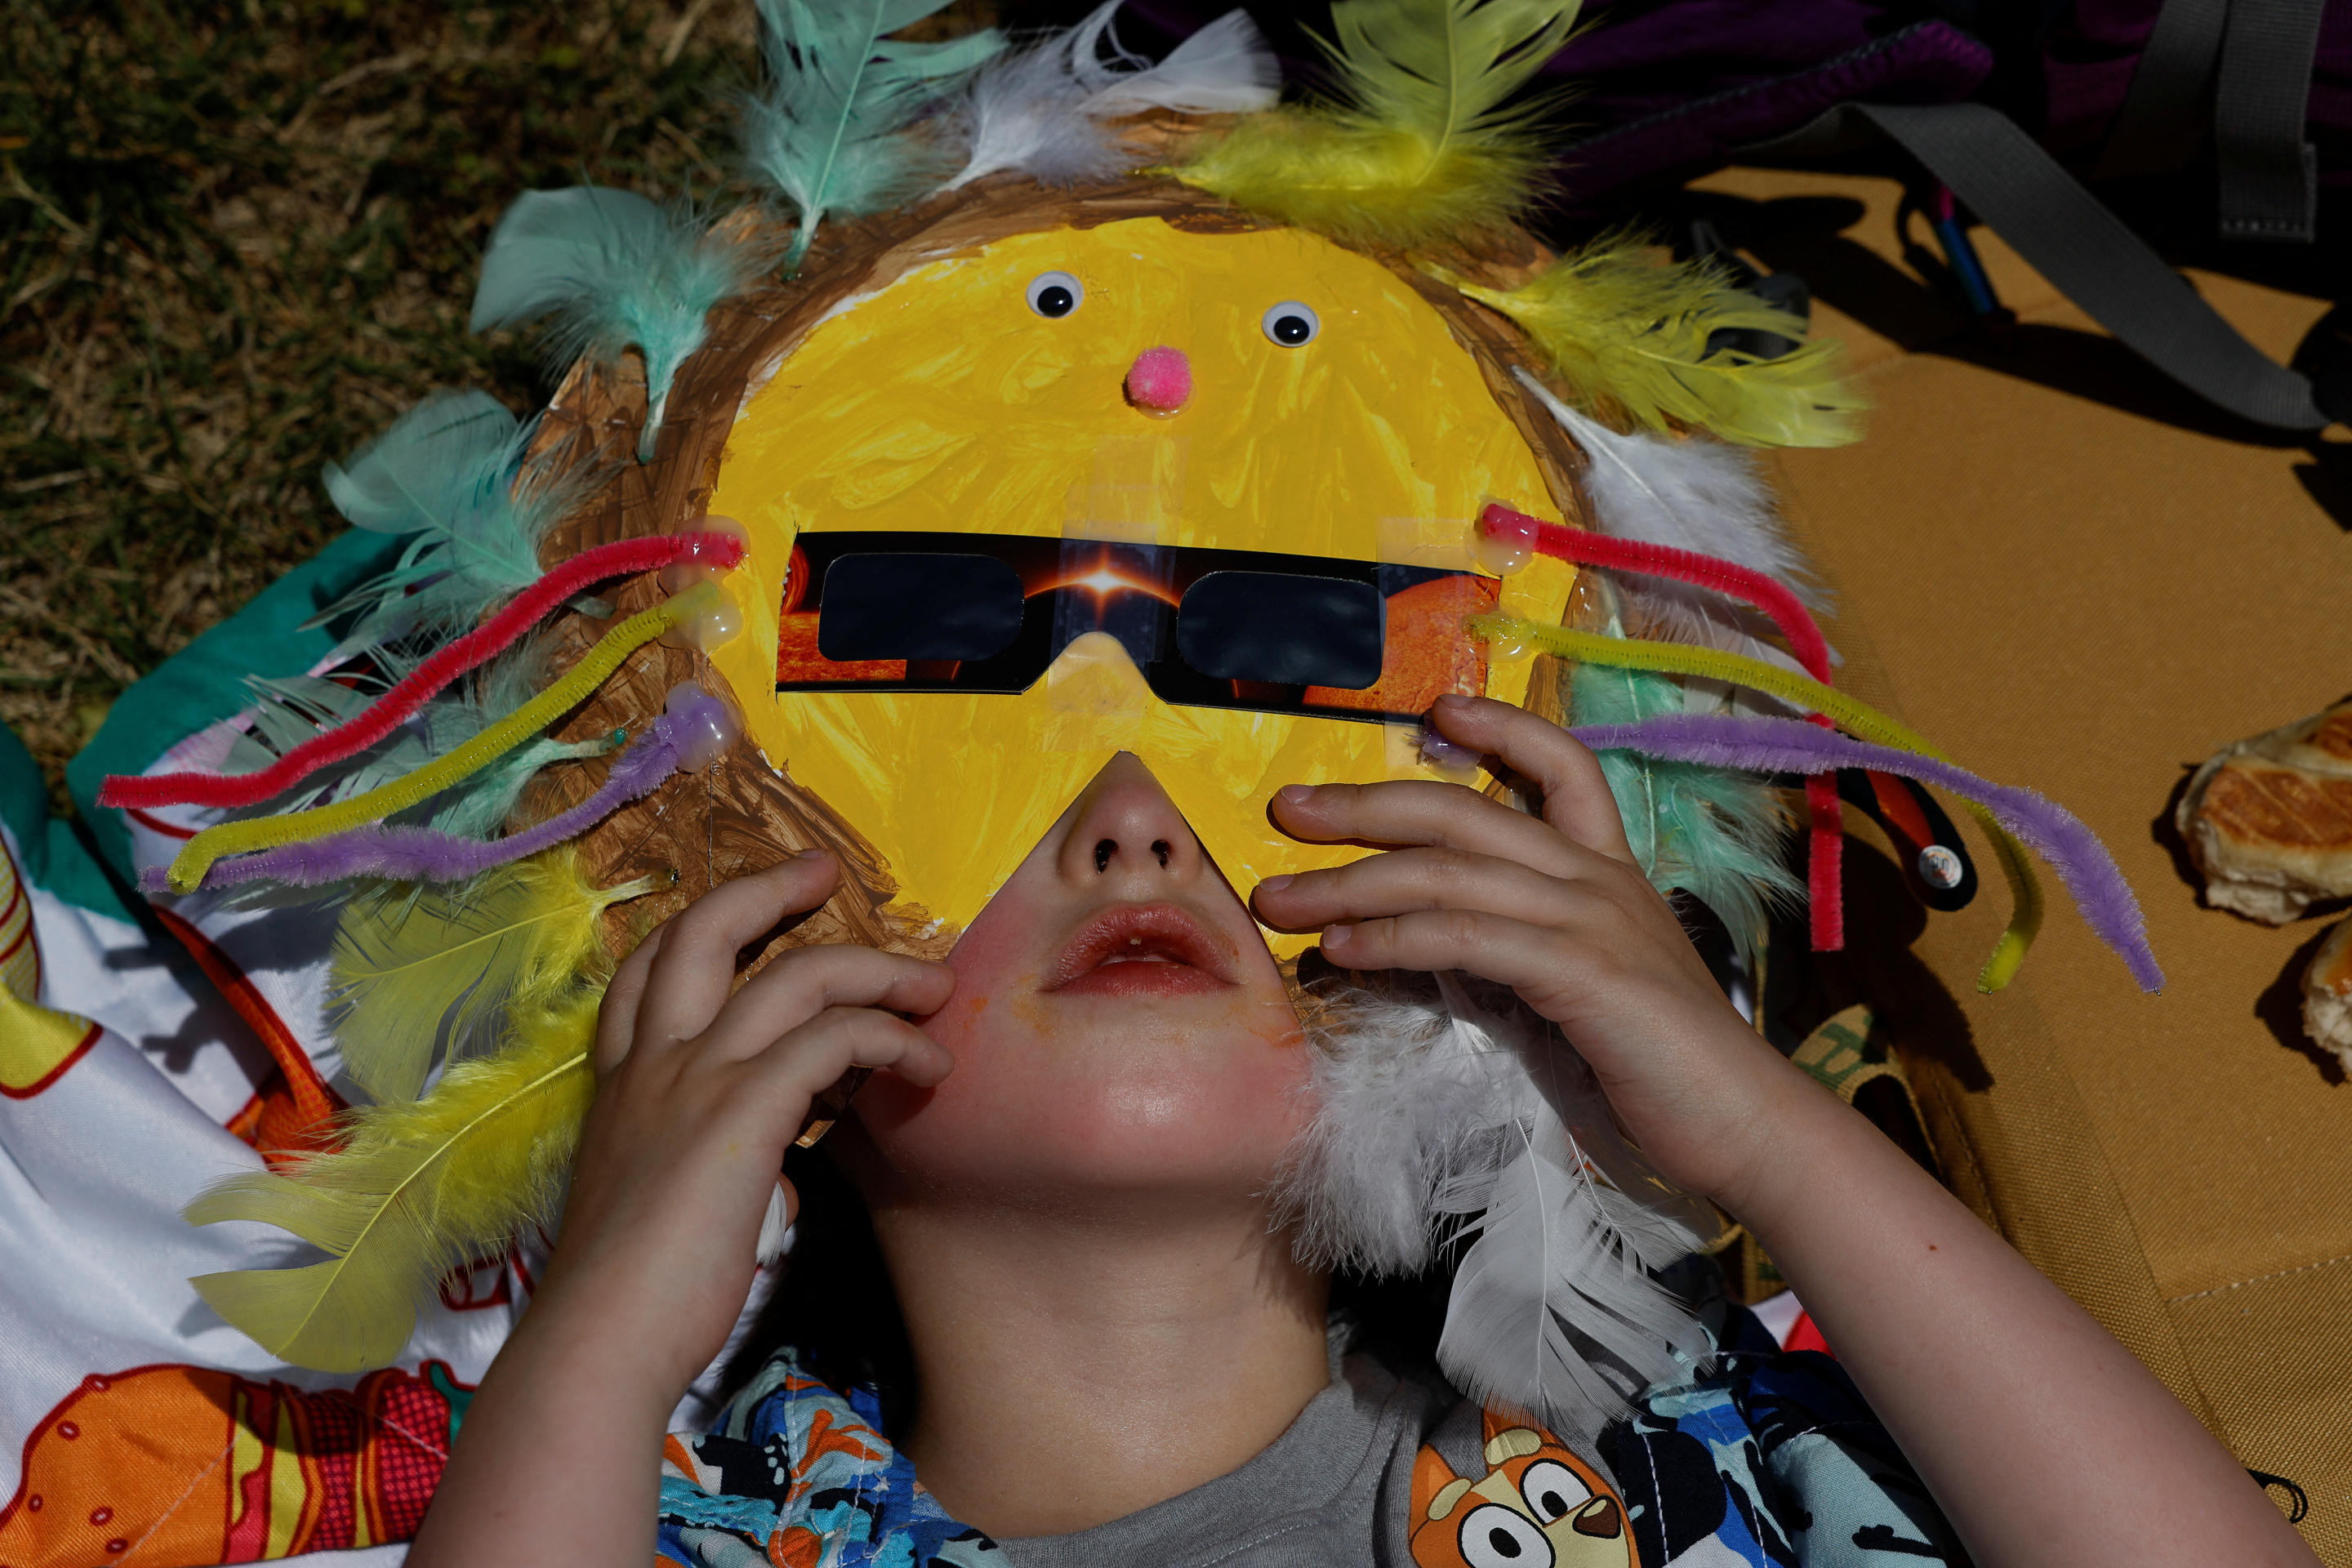 Judah Terlep, 4, wears a mask with solar eclipse glasses, ahead of a total solar eclipse, where the moon will blot out the sun, in Carbondale, Ill. ipse, where the moon will blot out the sun, in Carbondale, Illinois on April 8, 2024. (Evelyn Hockstein/Reuters)